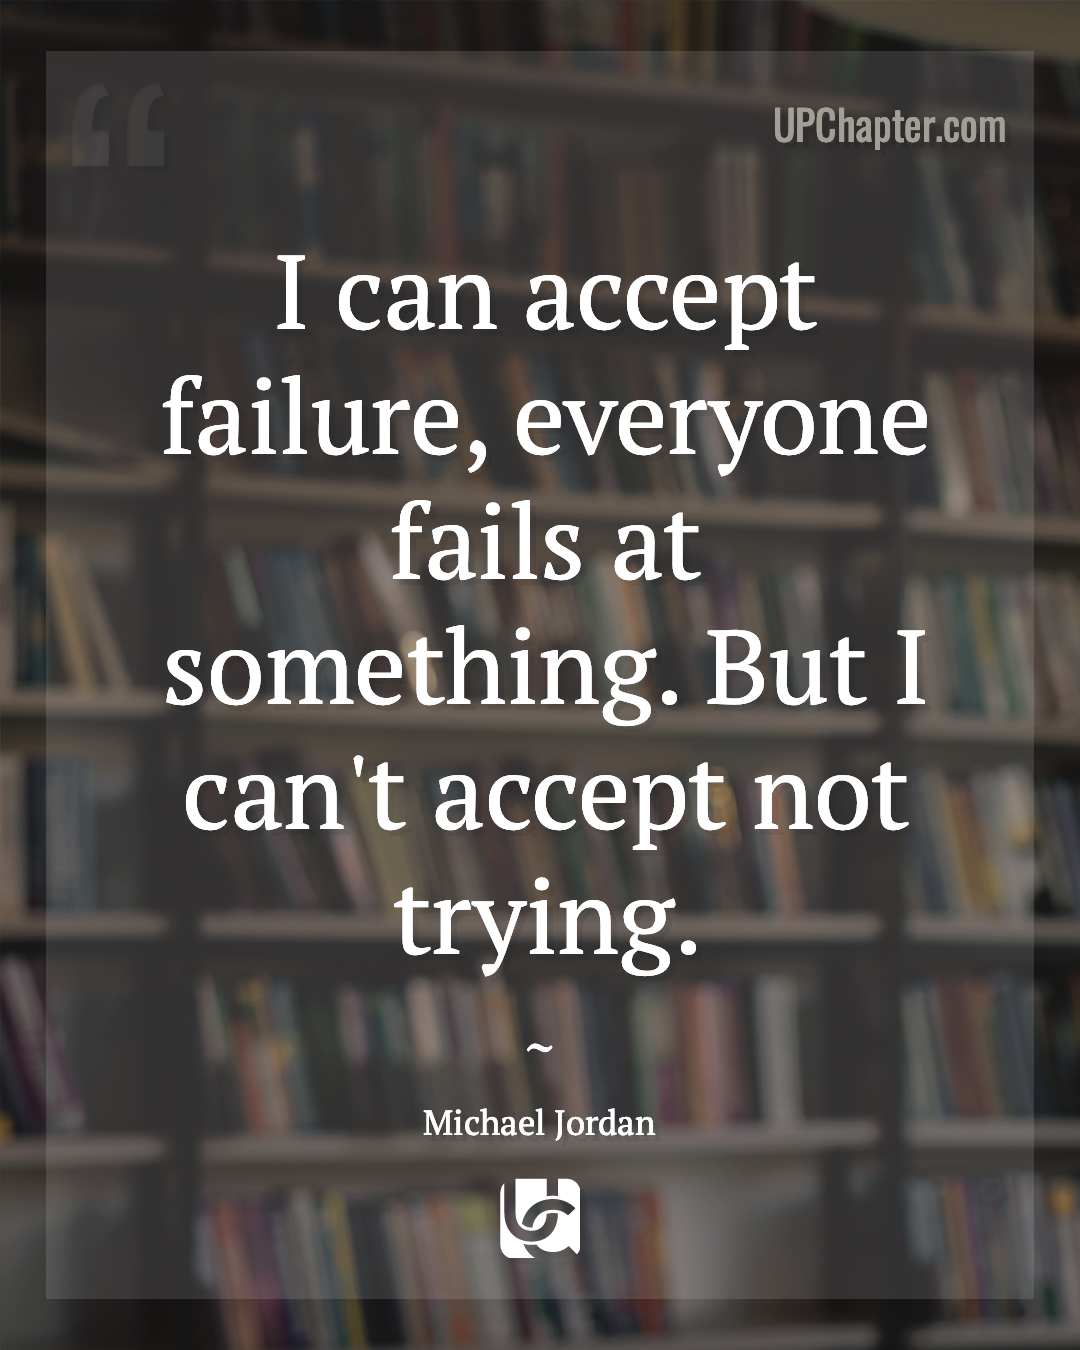 Palads TVstation dreng I can accept failure, everyone fails at something | UPChapter